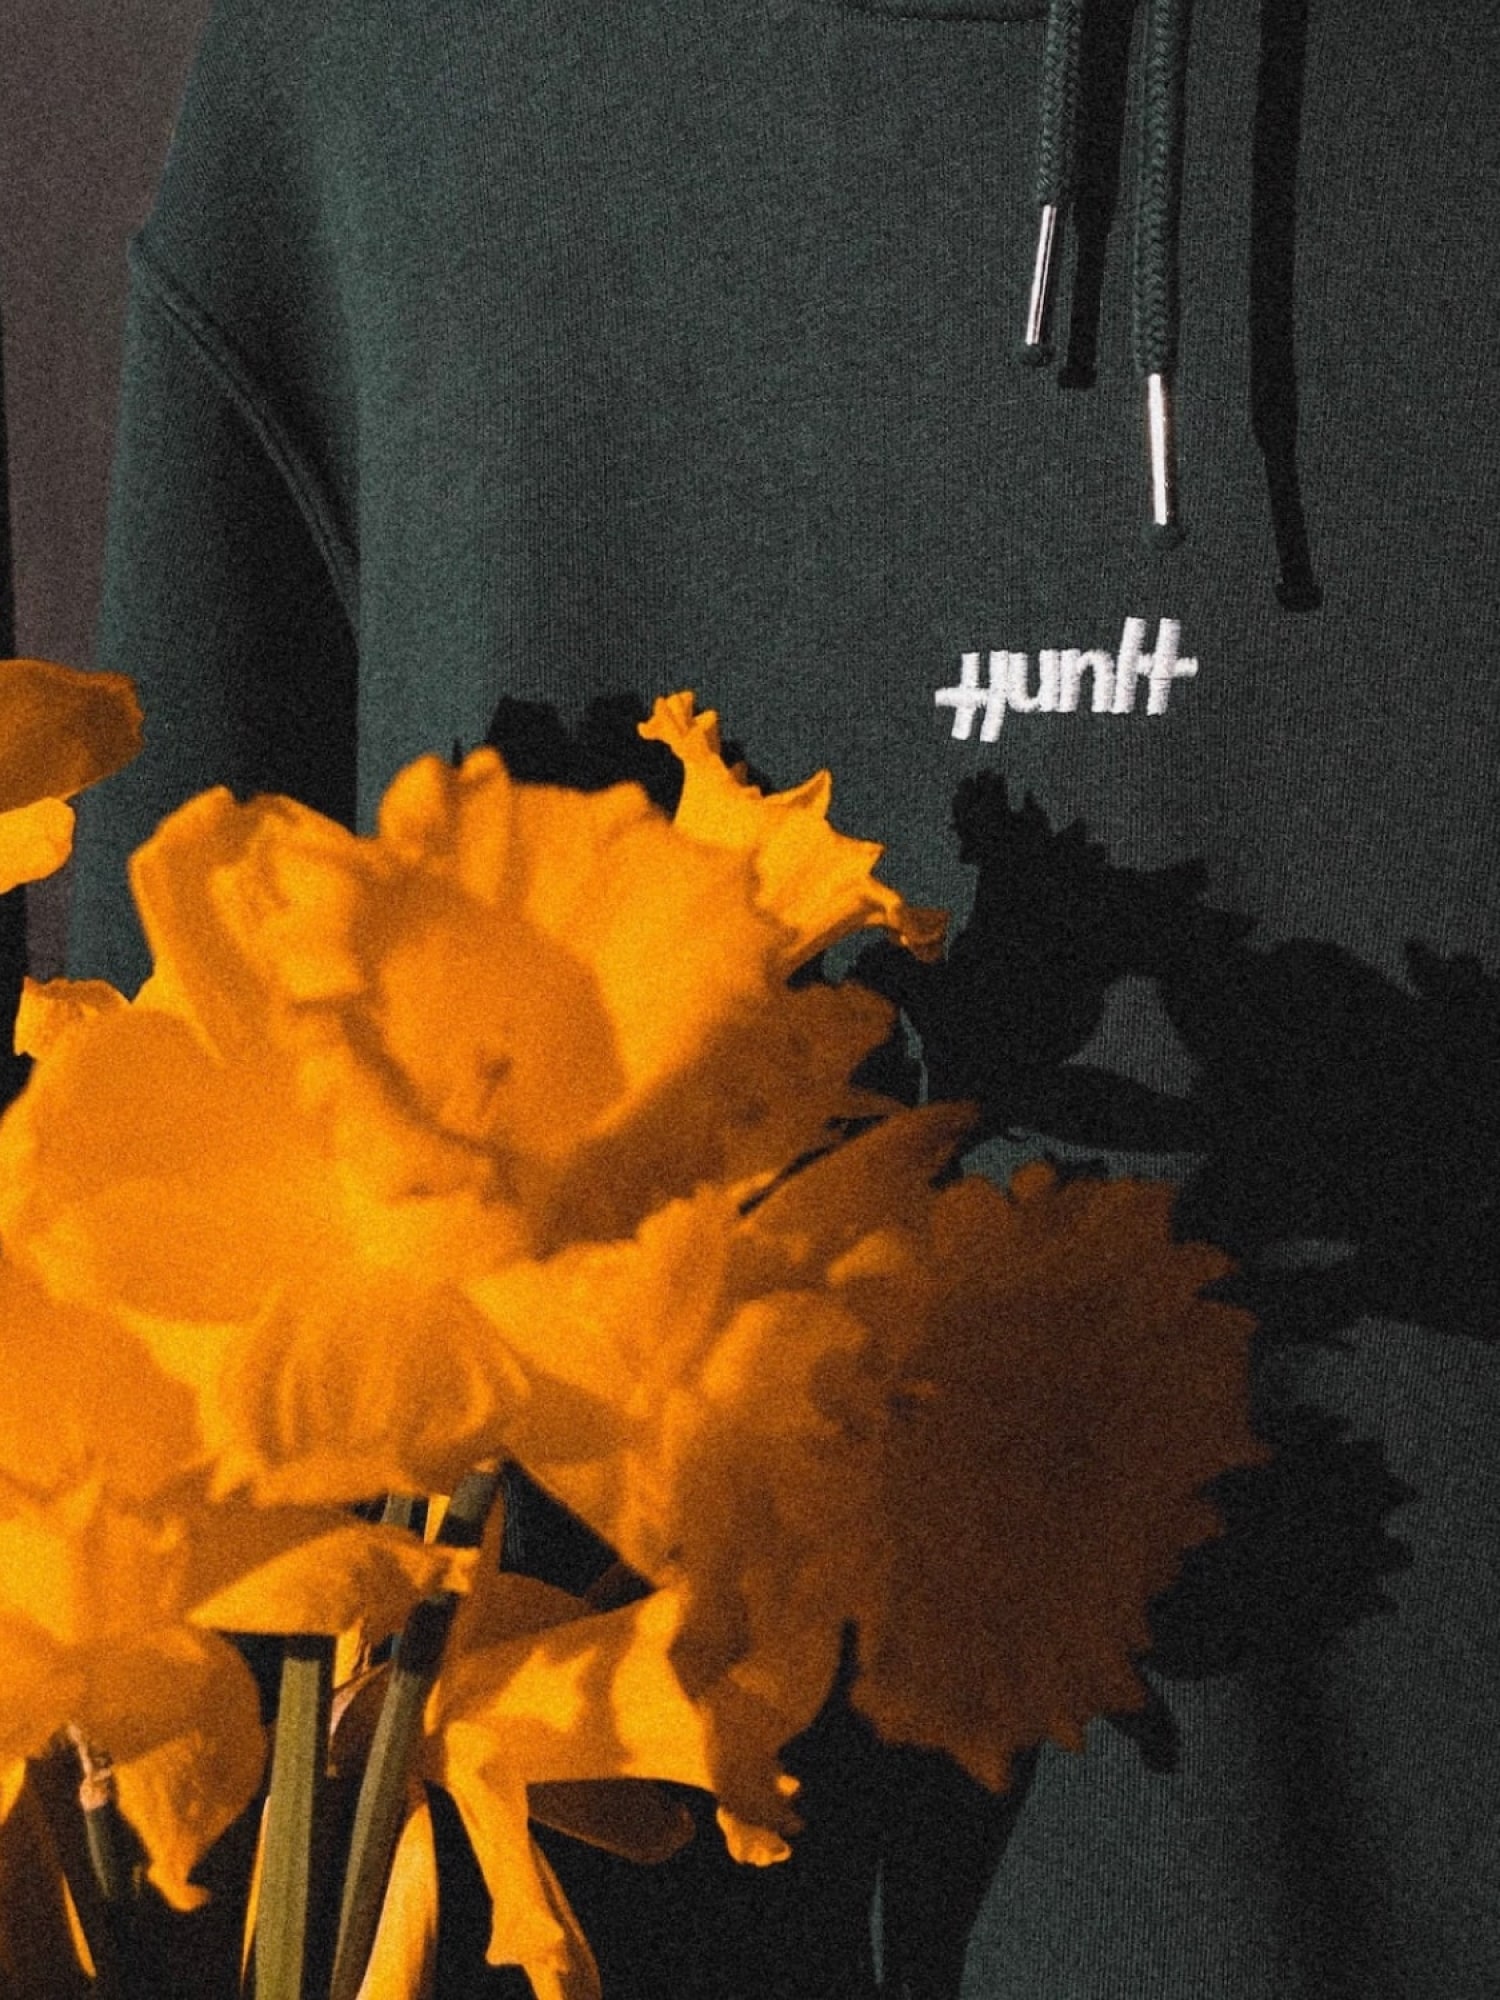 Yellow flowers in front of a green hoodie with an embroidered white Huntt logo